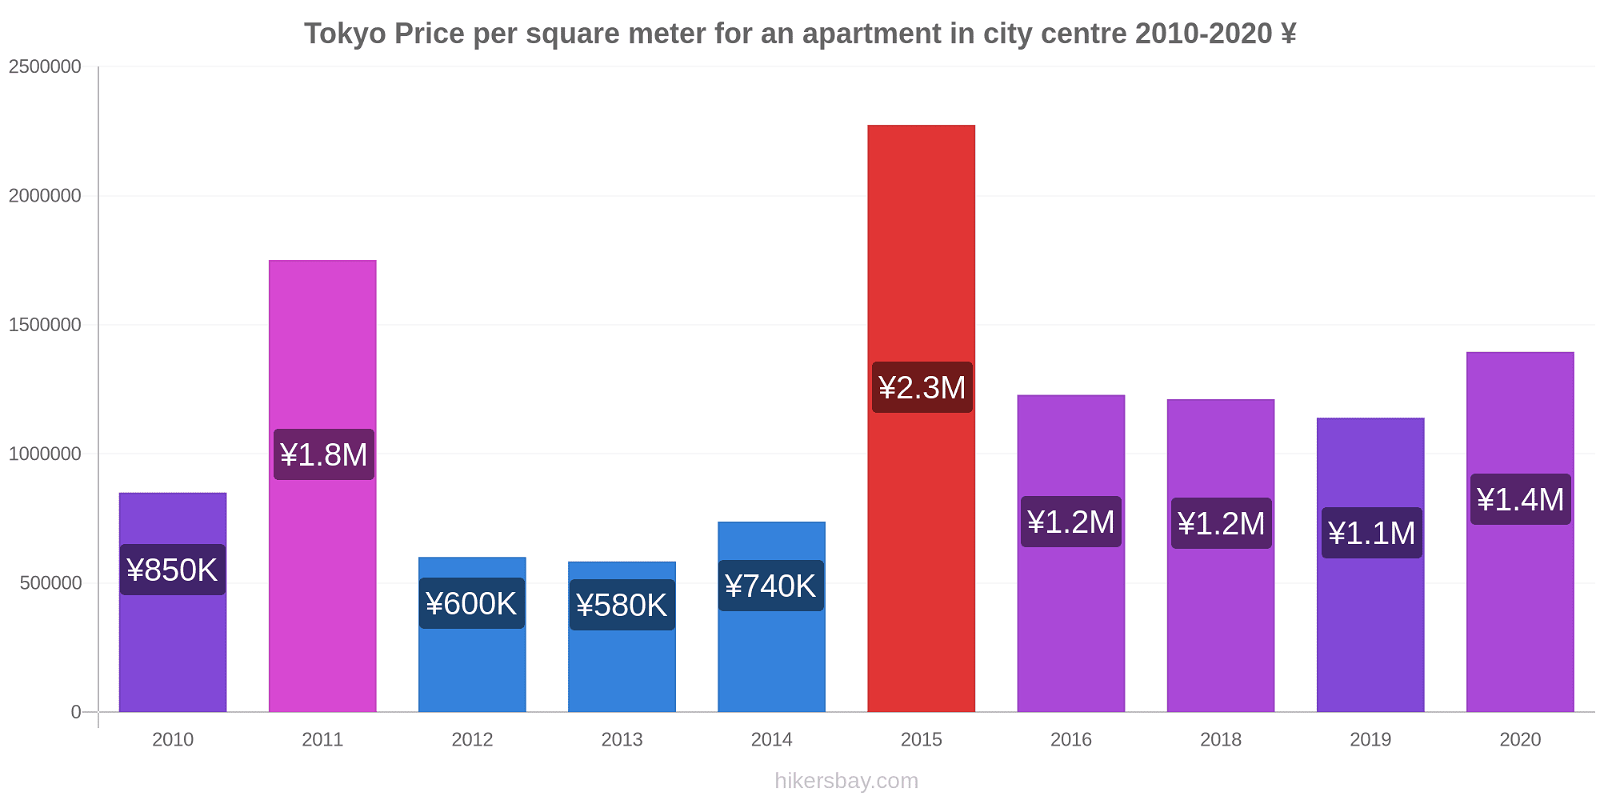 Tokyo price changes Price per square meter for an apartment in city centre hikersbay.com